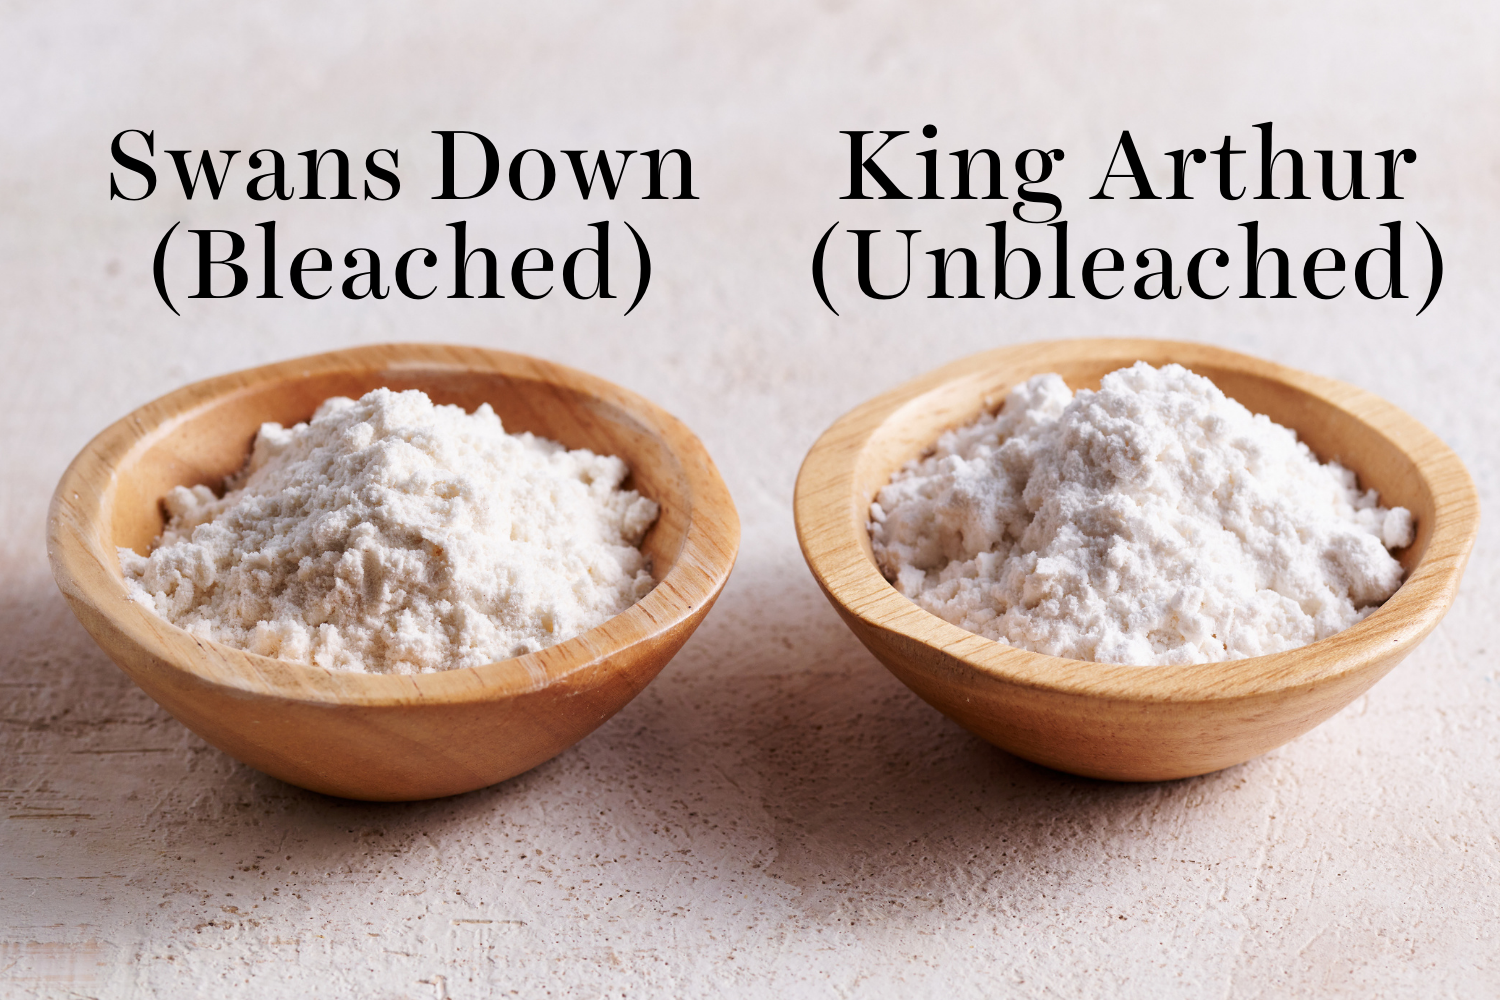 two small bowls of cake flour next to each other. one is Swans Down and the other is King Arthur.